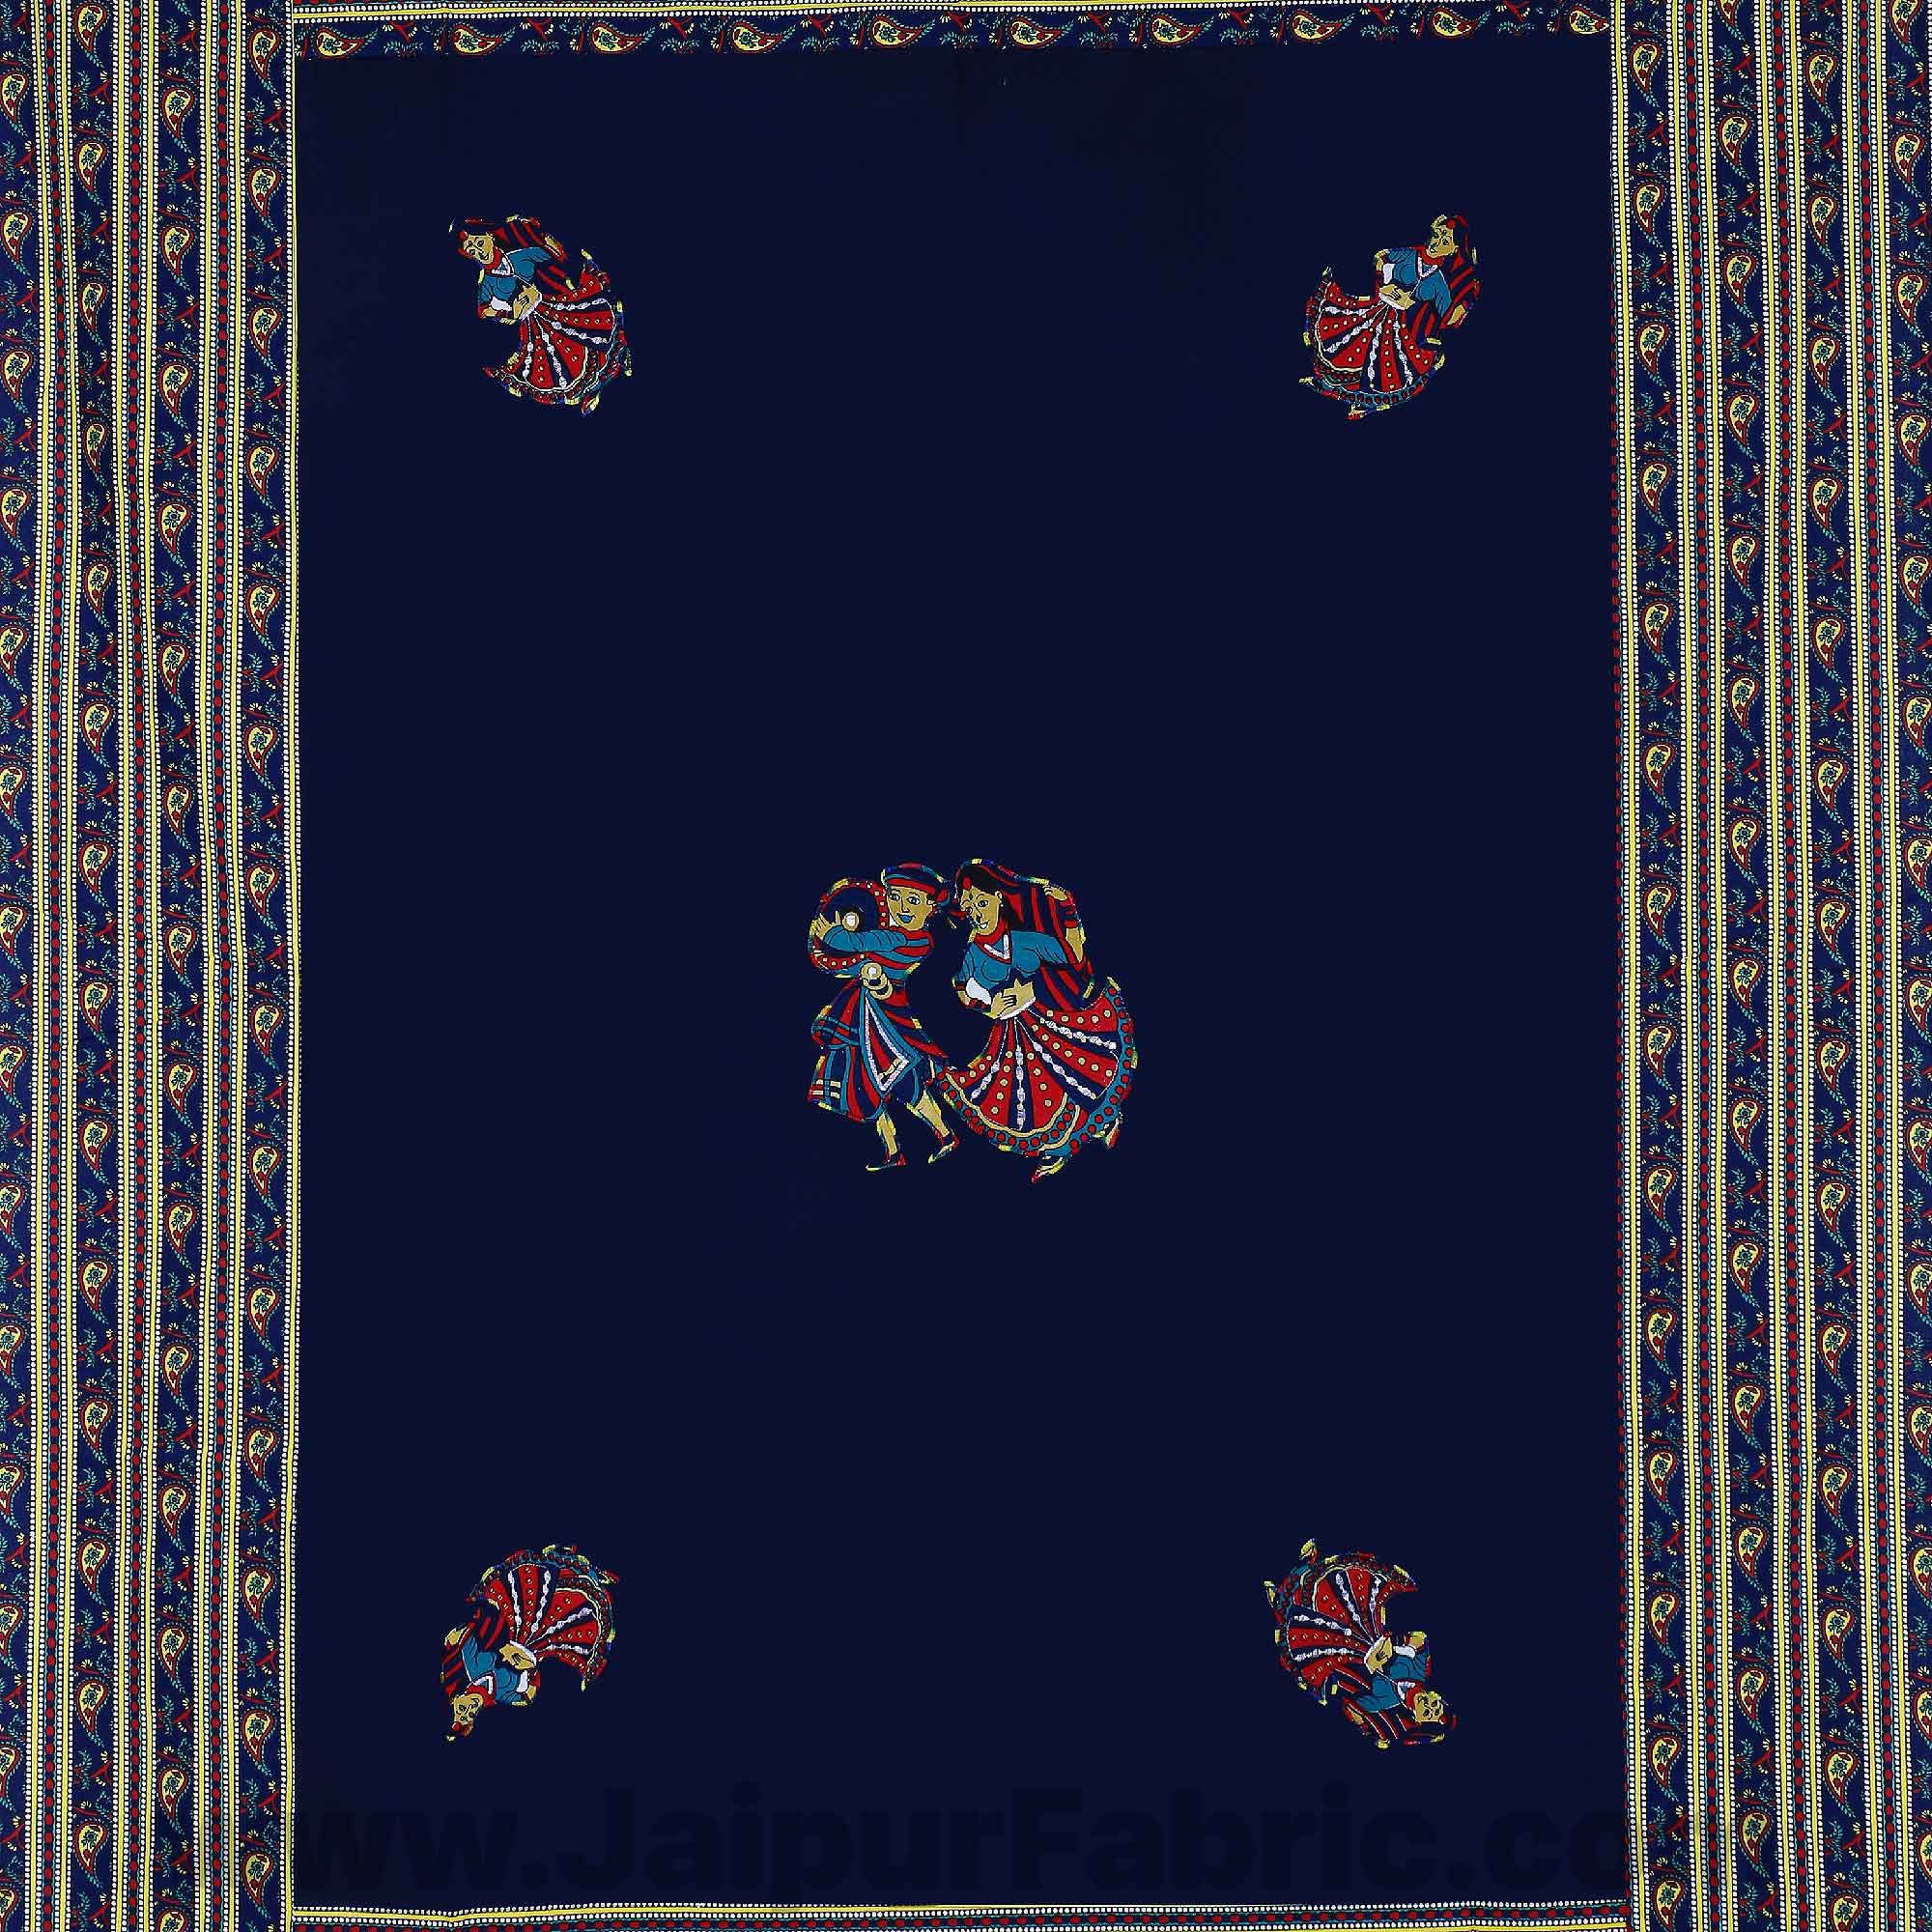 Applique Blue Rajasthani Dance Jaipuri  Hand Made Embroidery Patch Work Single Bedsheet